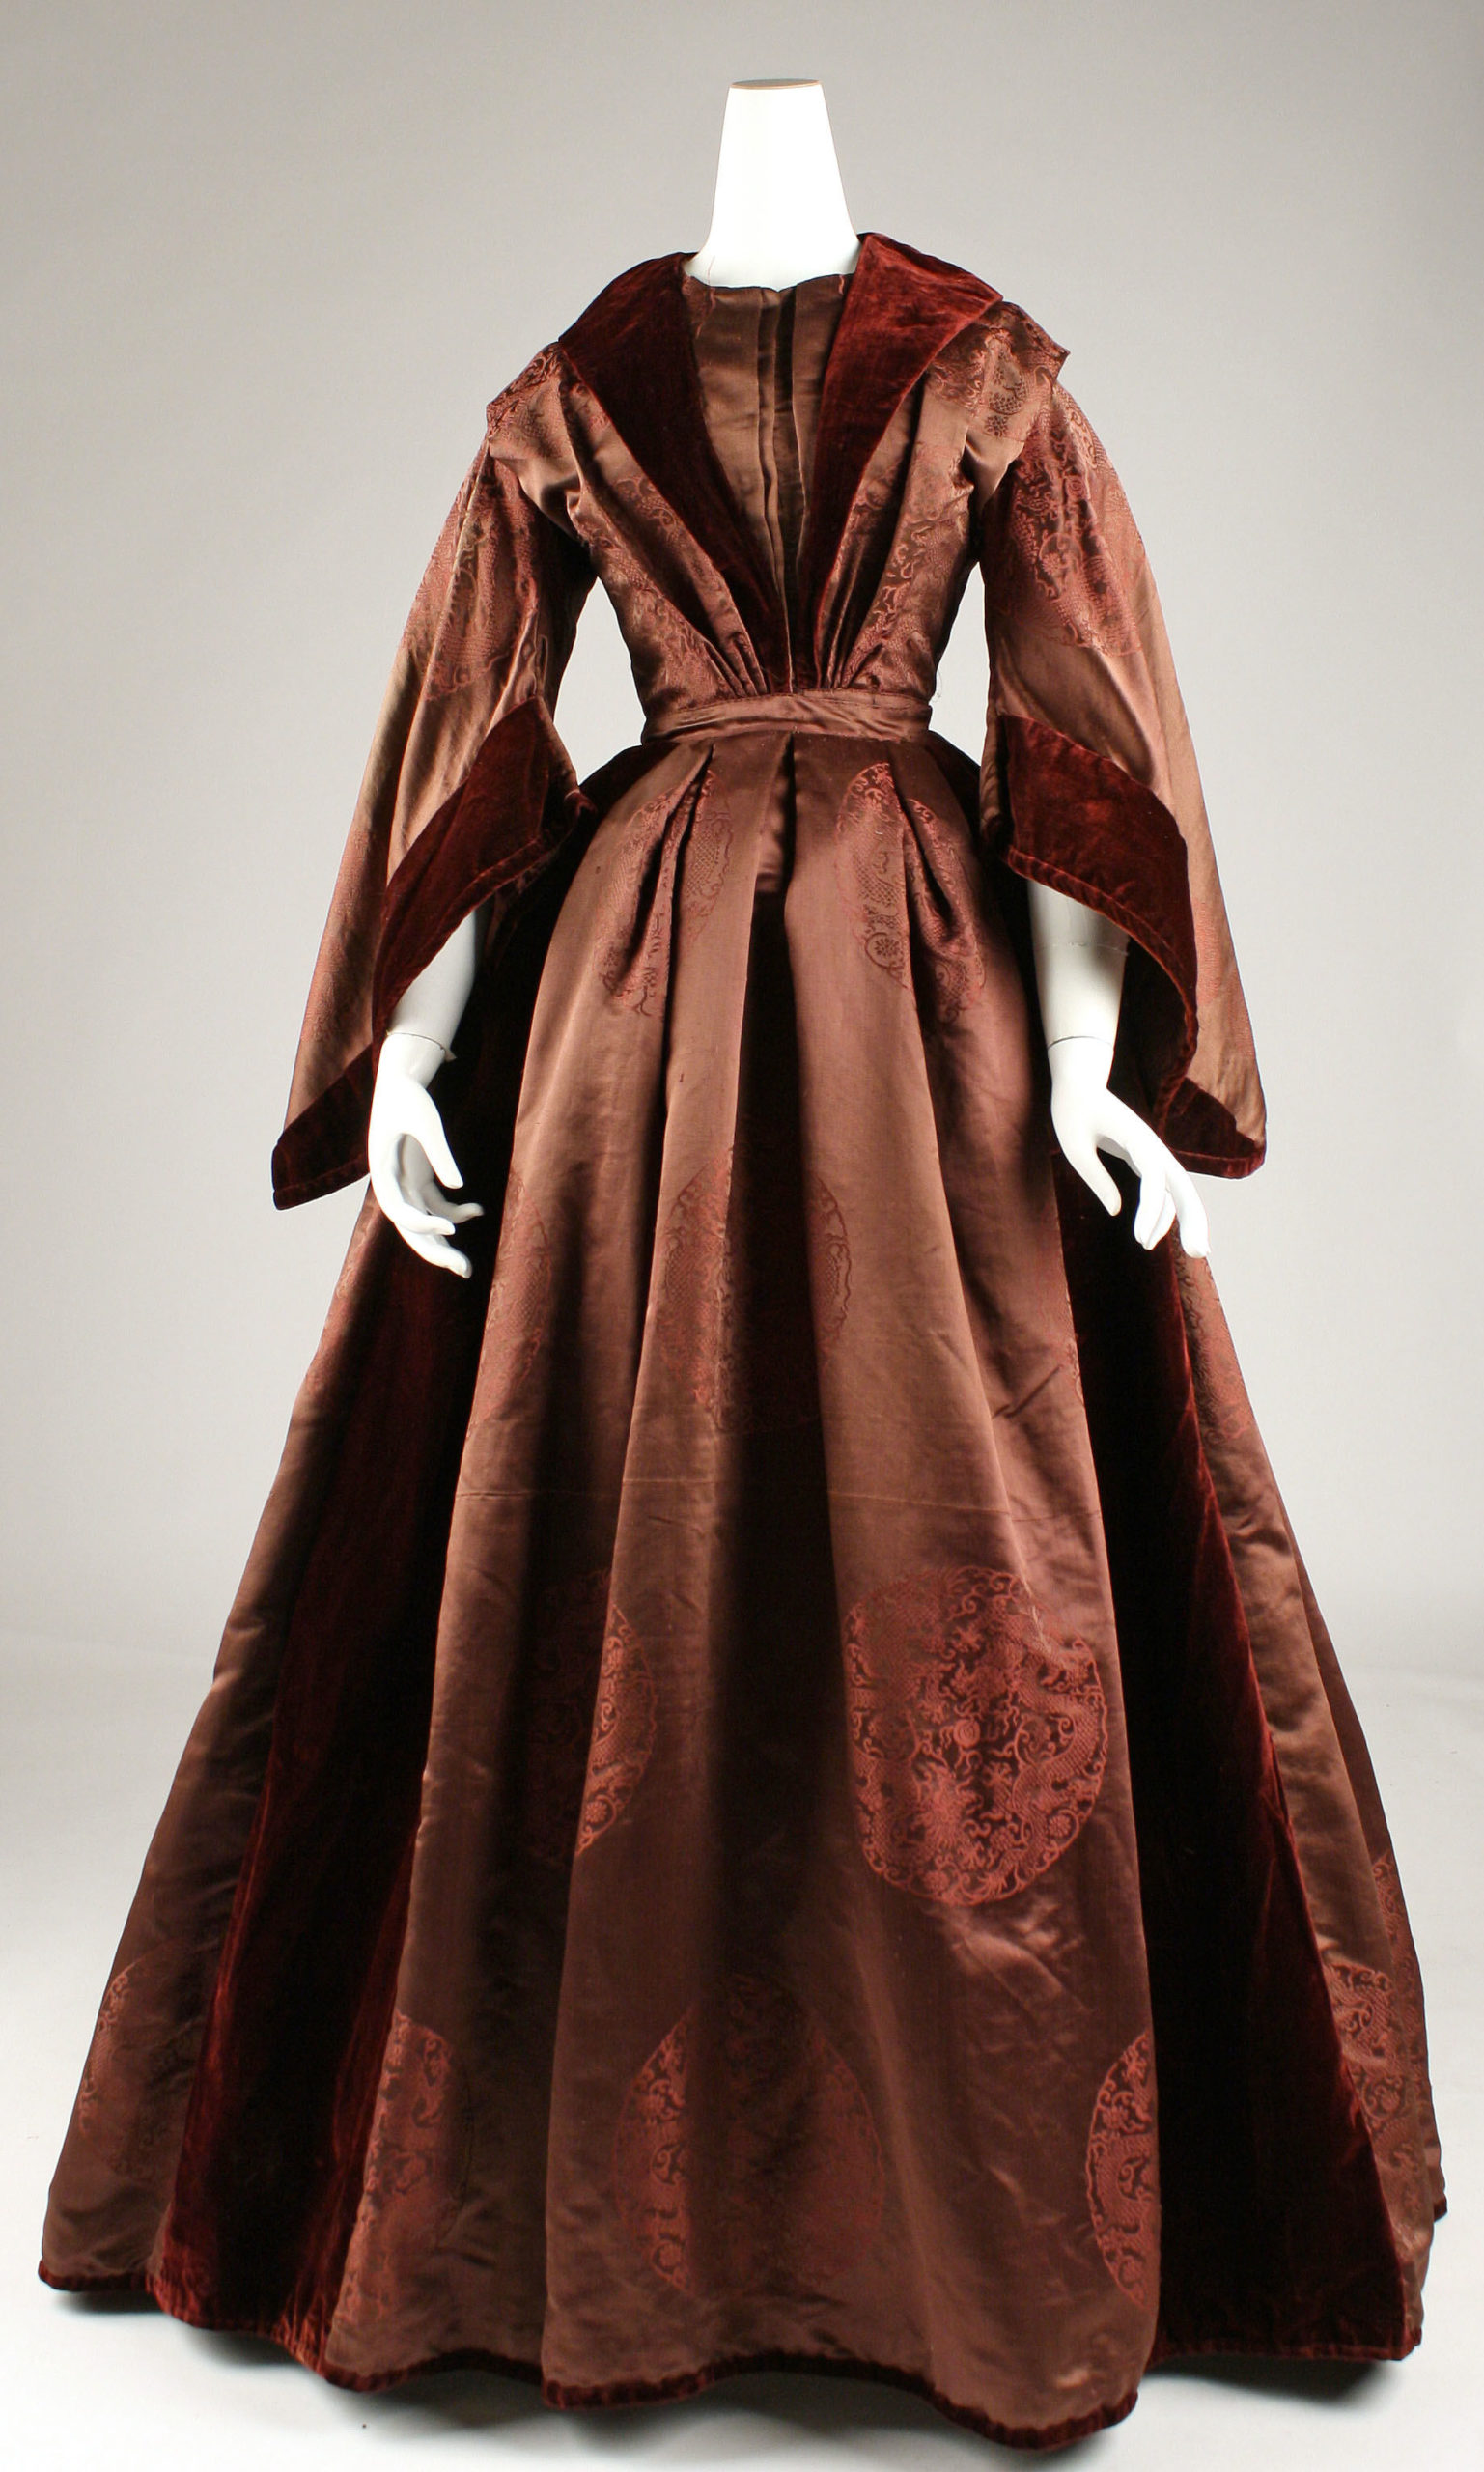 Day Dress, ca. 1850, British, silk, Purchase, Gifts in memory of Paul M. Ettesvold, and Judith and Gerson Leiber Fund, 1994, Metropolitan Museum of Art, 1994.302.1